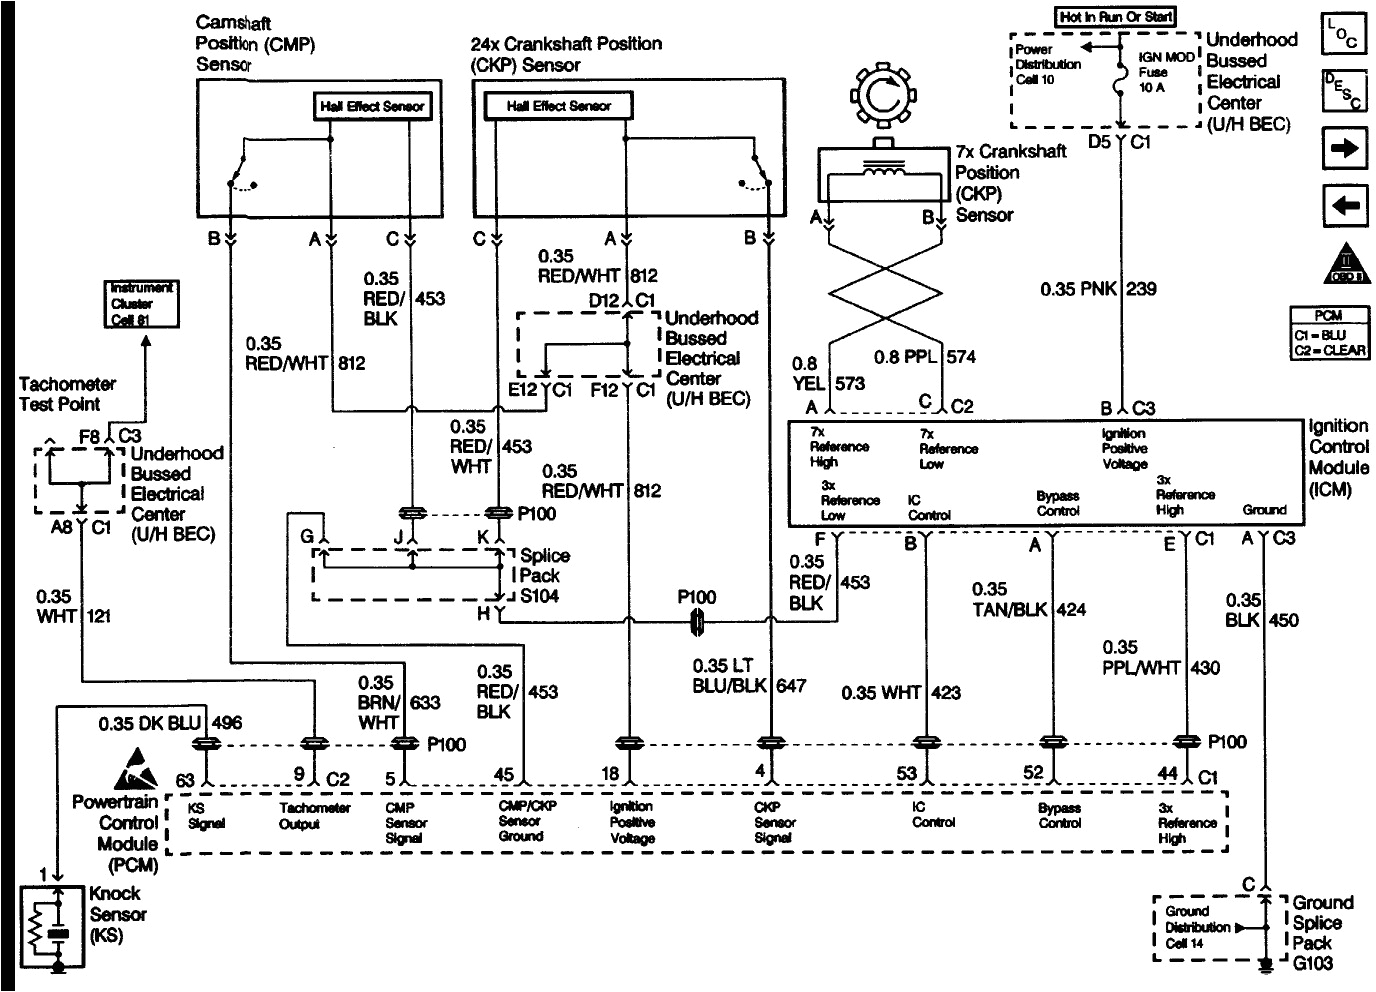 2010 07 09 013051 ign 1 on 2001 chevy malibu wiring diagram in 2001 chevy malibu wiring diagram gif